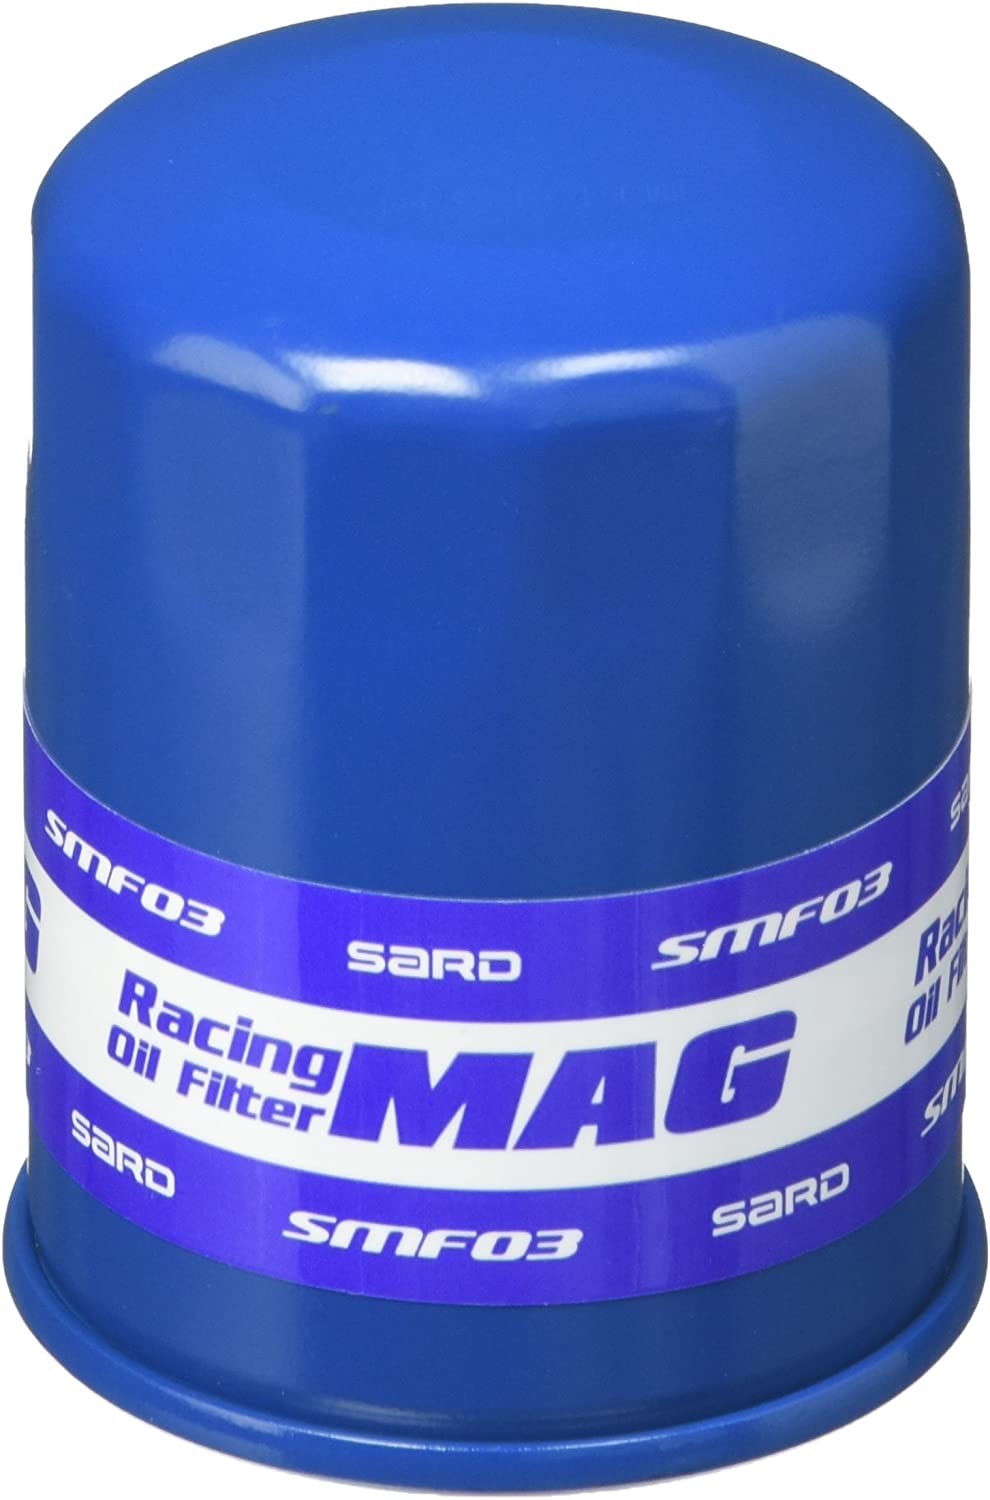 SARD RACING OIL FILTER For MOVE L900S L910S SMF00